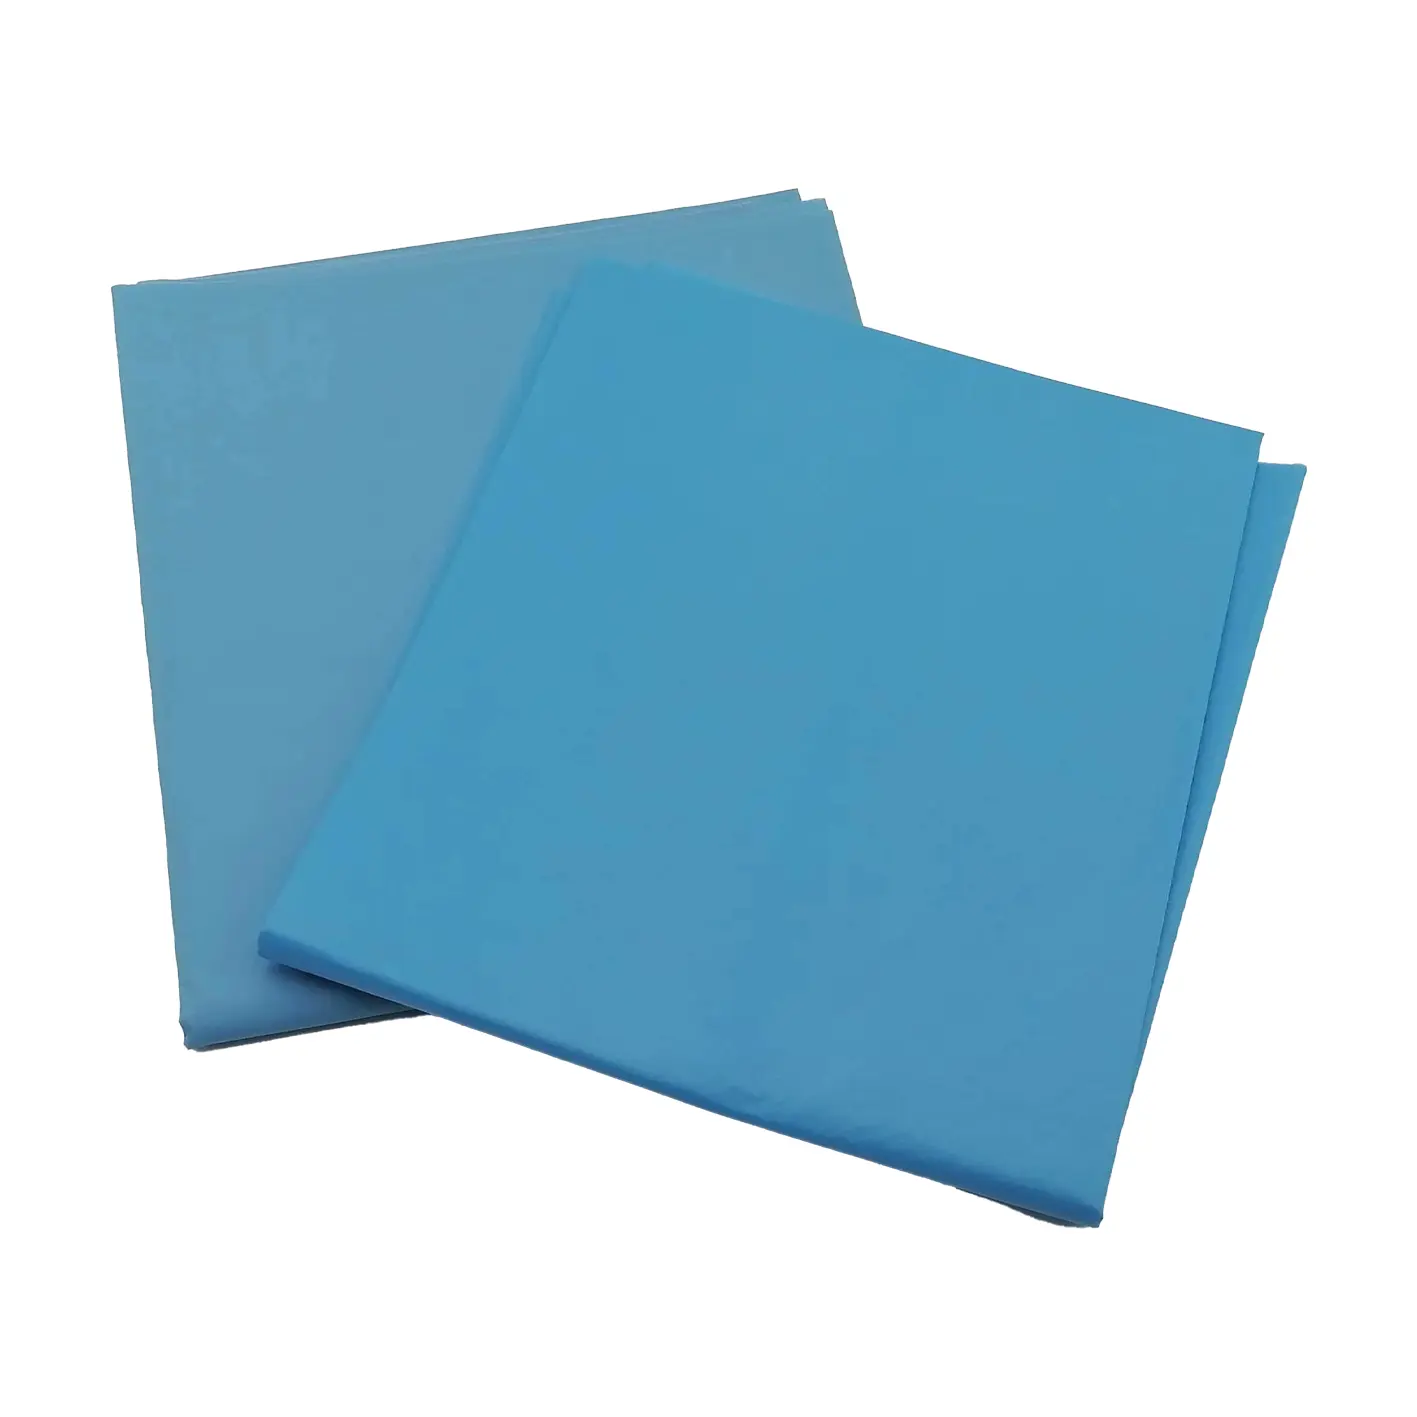 Disposable Hospital Bed Sheets Cheap Medical Supplies Fitted Sheet for Everyday Use for Hotels and Hospitals